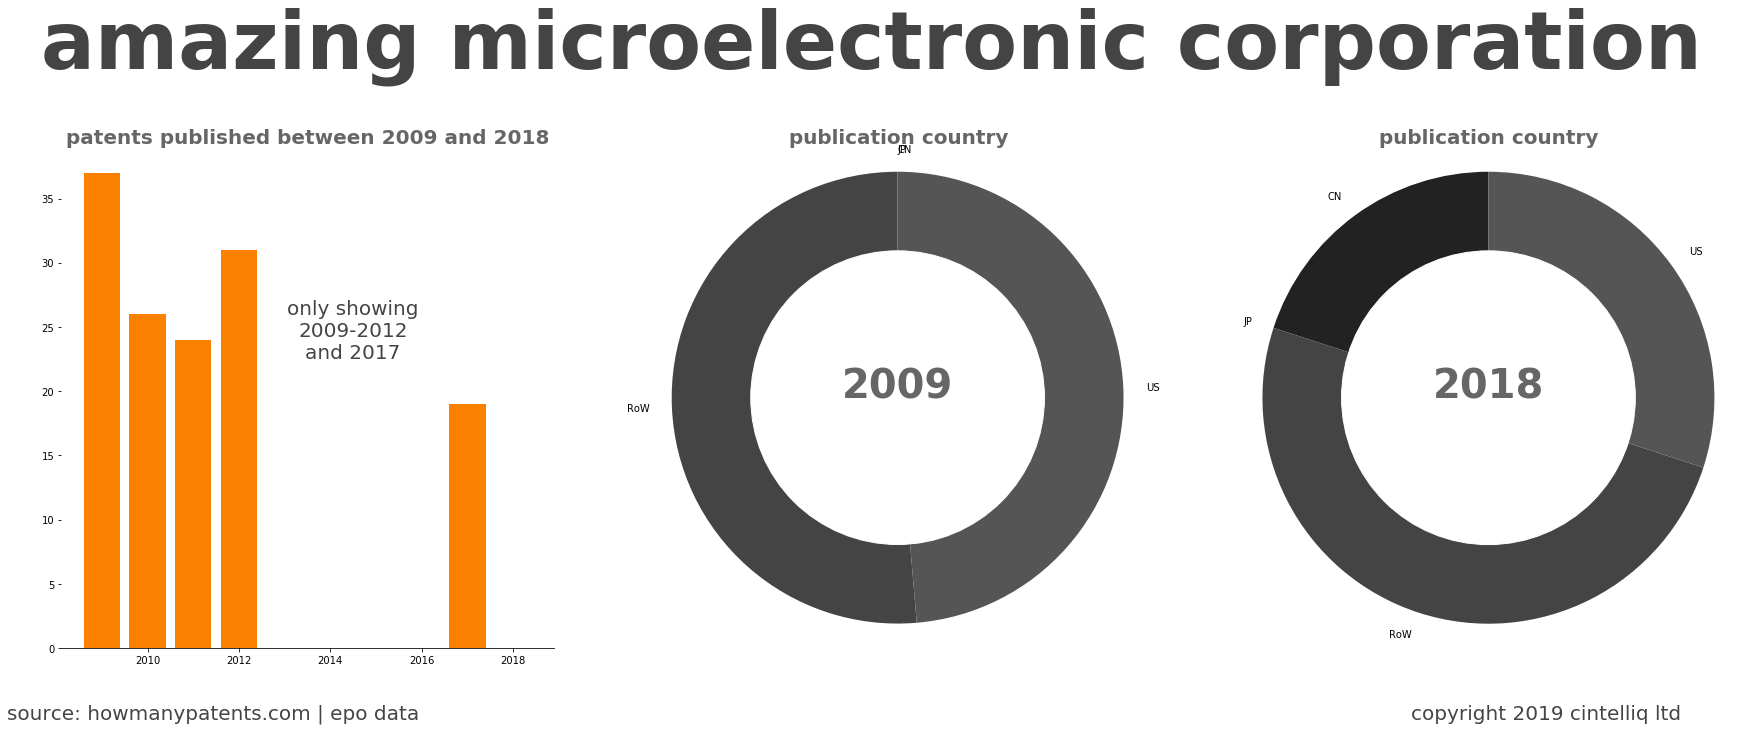 summary of patents for Amazing Microelectronic Corporation